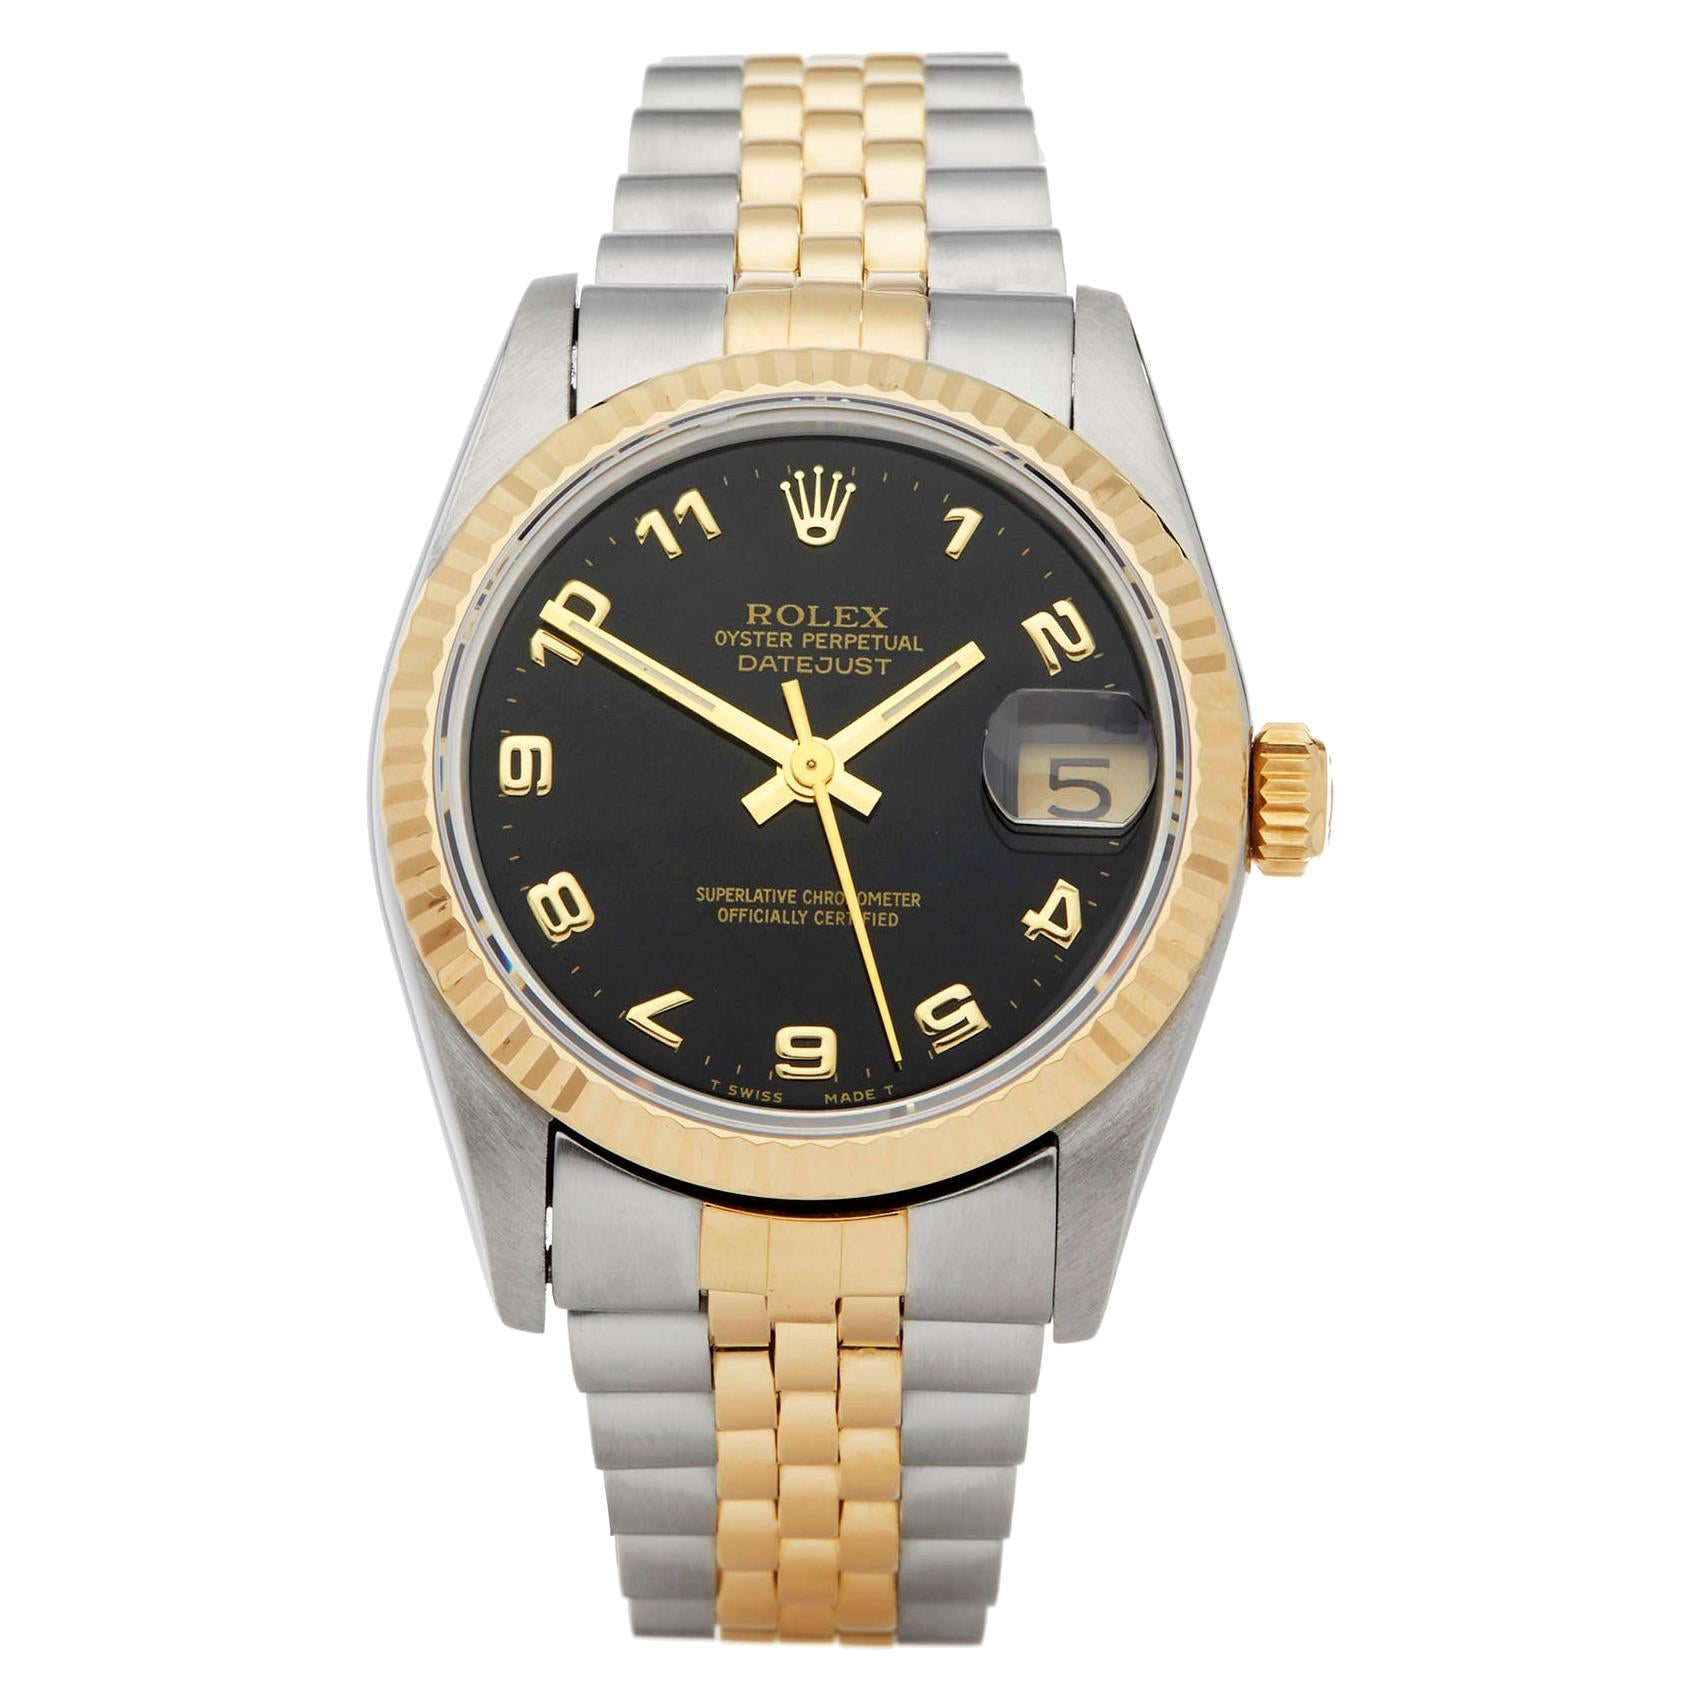 Rolex Datejust 31 Stainless Steel and Yellow Gold 62873 Wristwatch